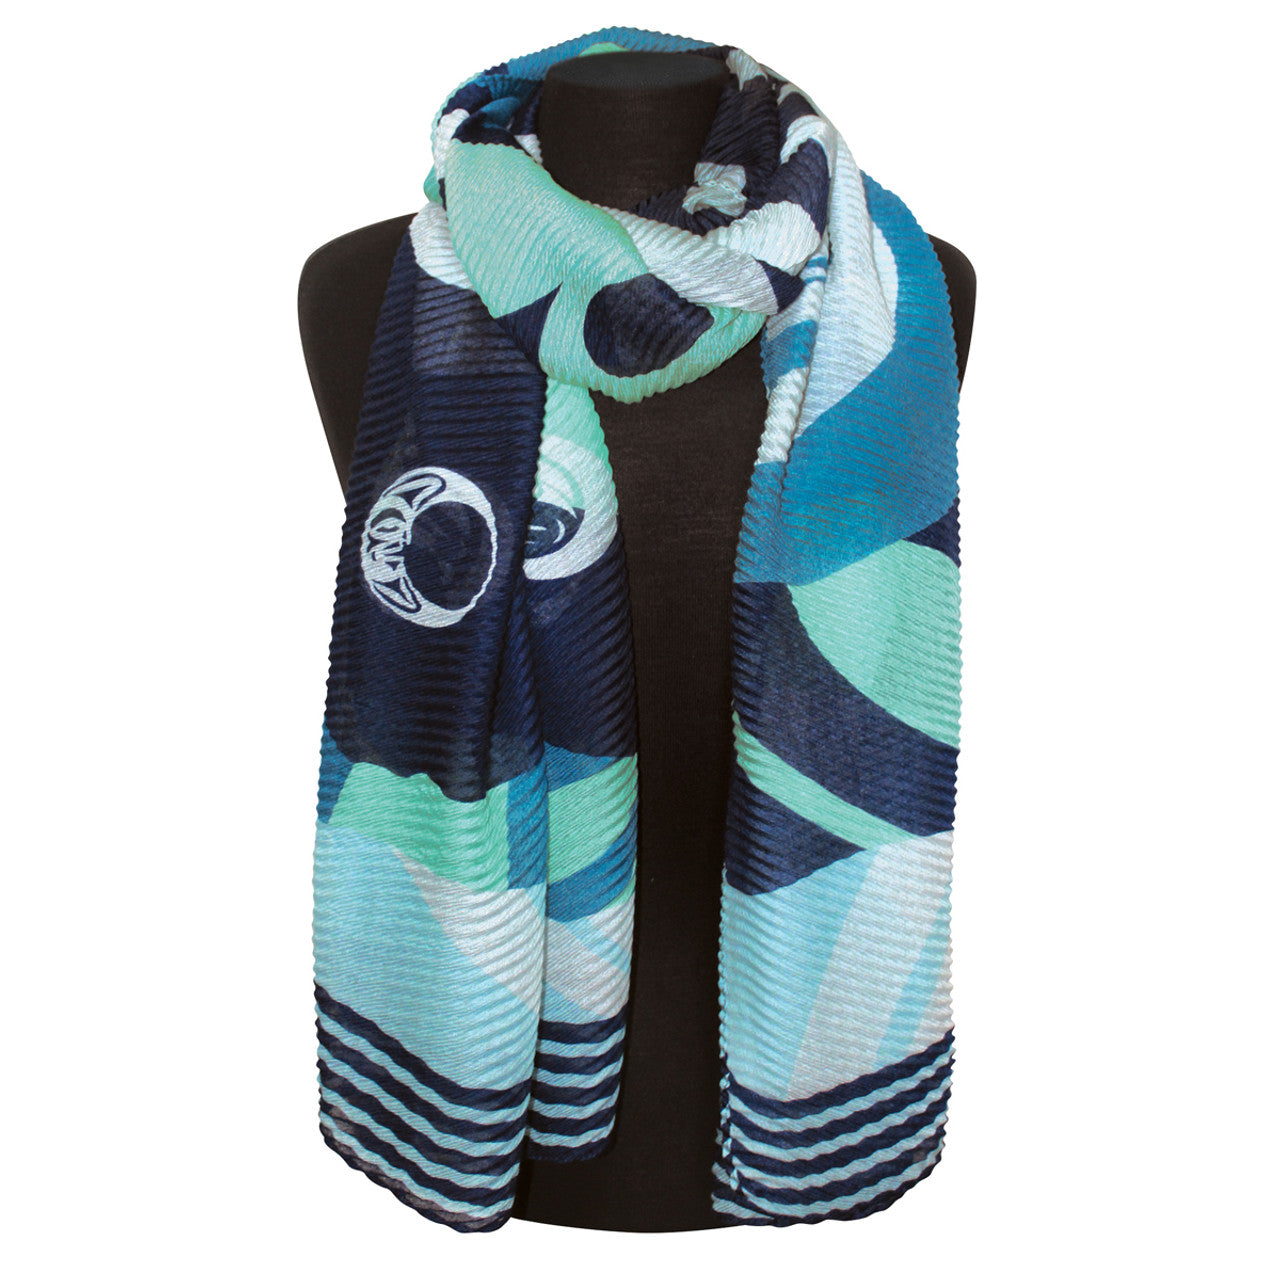 ECO SCARFS - Moon Phases - ESCARF24 - House of Himwitsa Native Art Gallery and Gifts